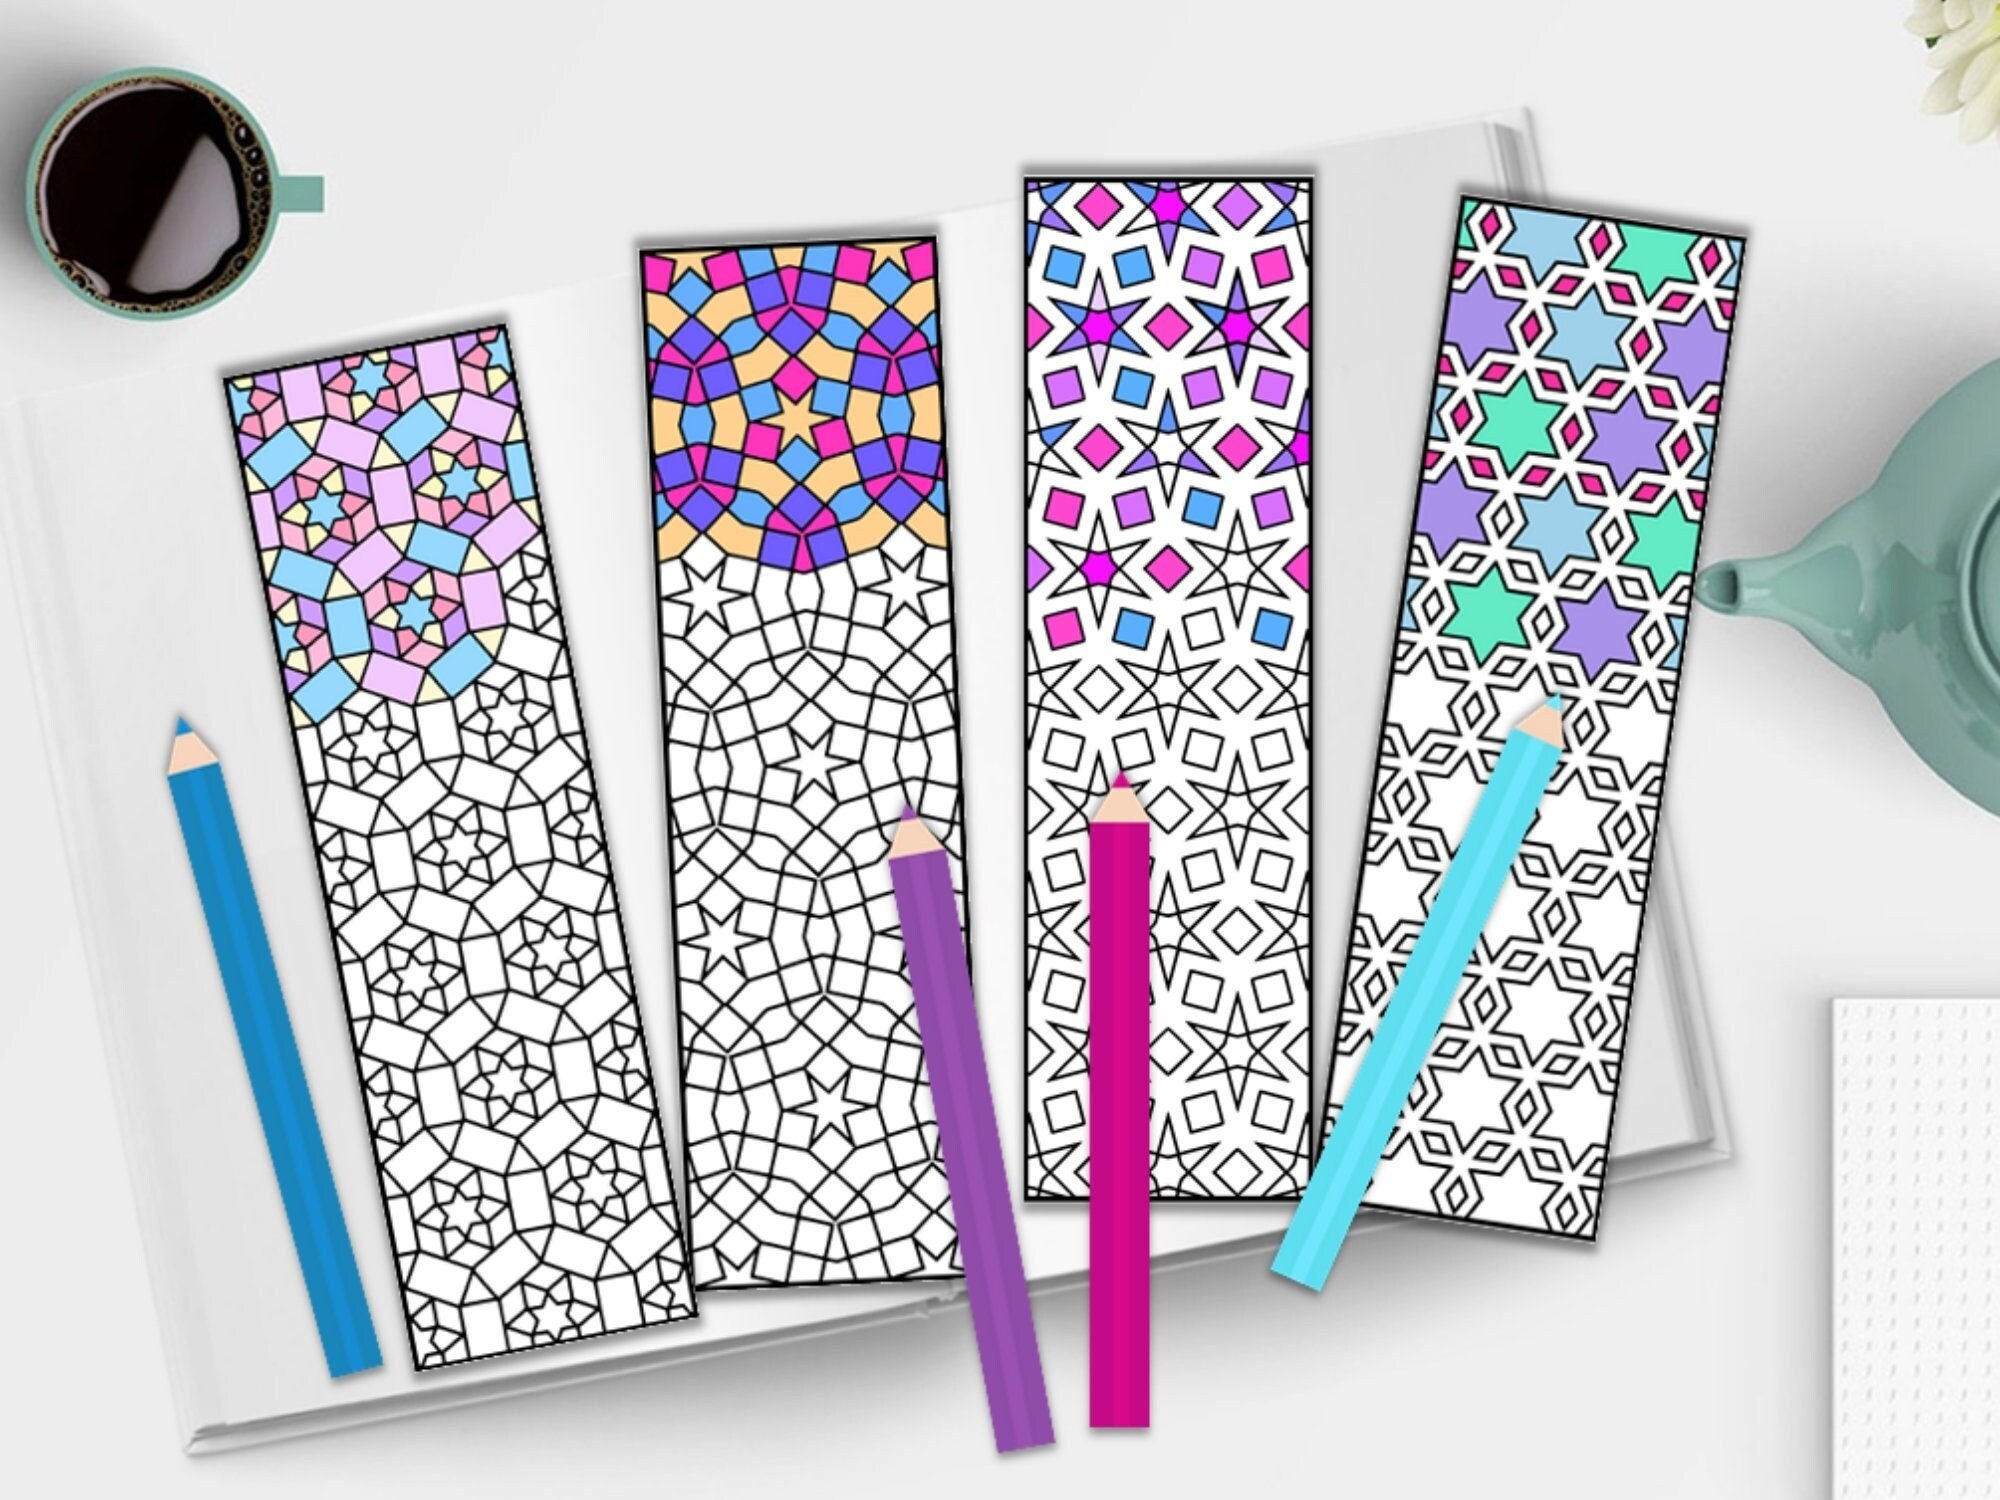 Mosaic Tile Patterns Coloring Bookmarks Geometric Coloring Printable  Bookmarks Relaxing Adult Coloring Page PDF Instant Download 